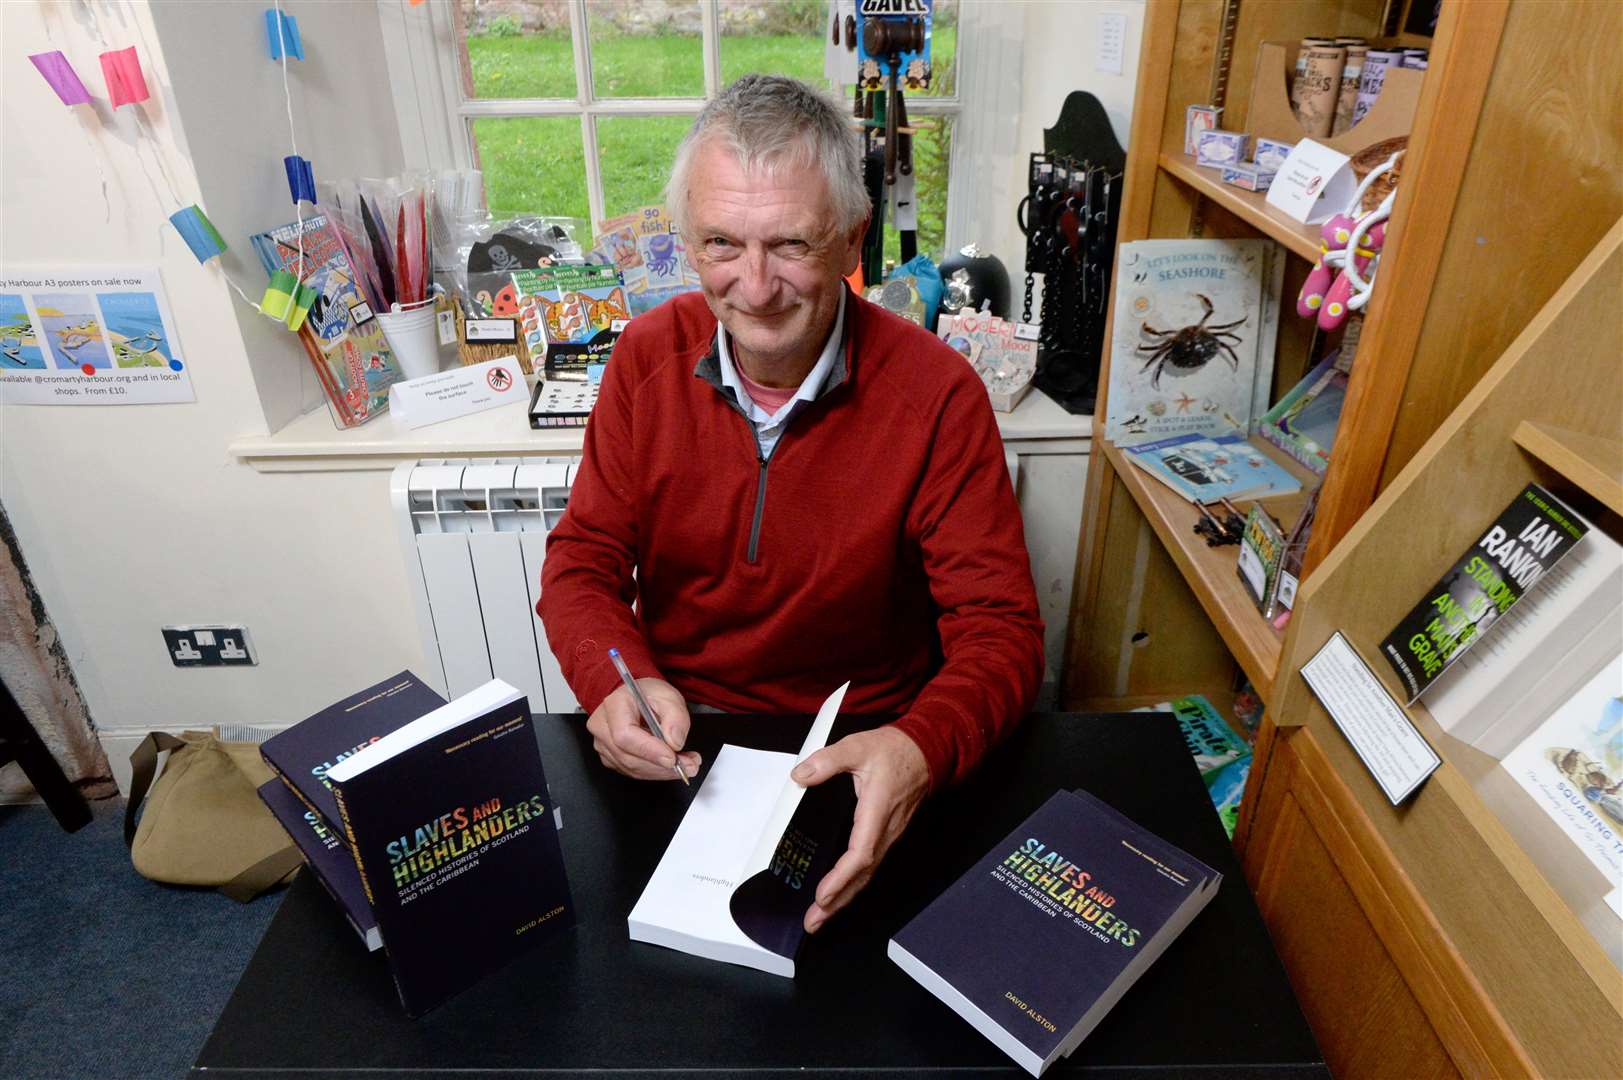 David Alston's book, Slaves and Highlanders: David Alston signing his new book. Picture: James Mackenzie.